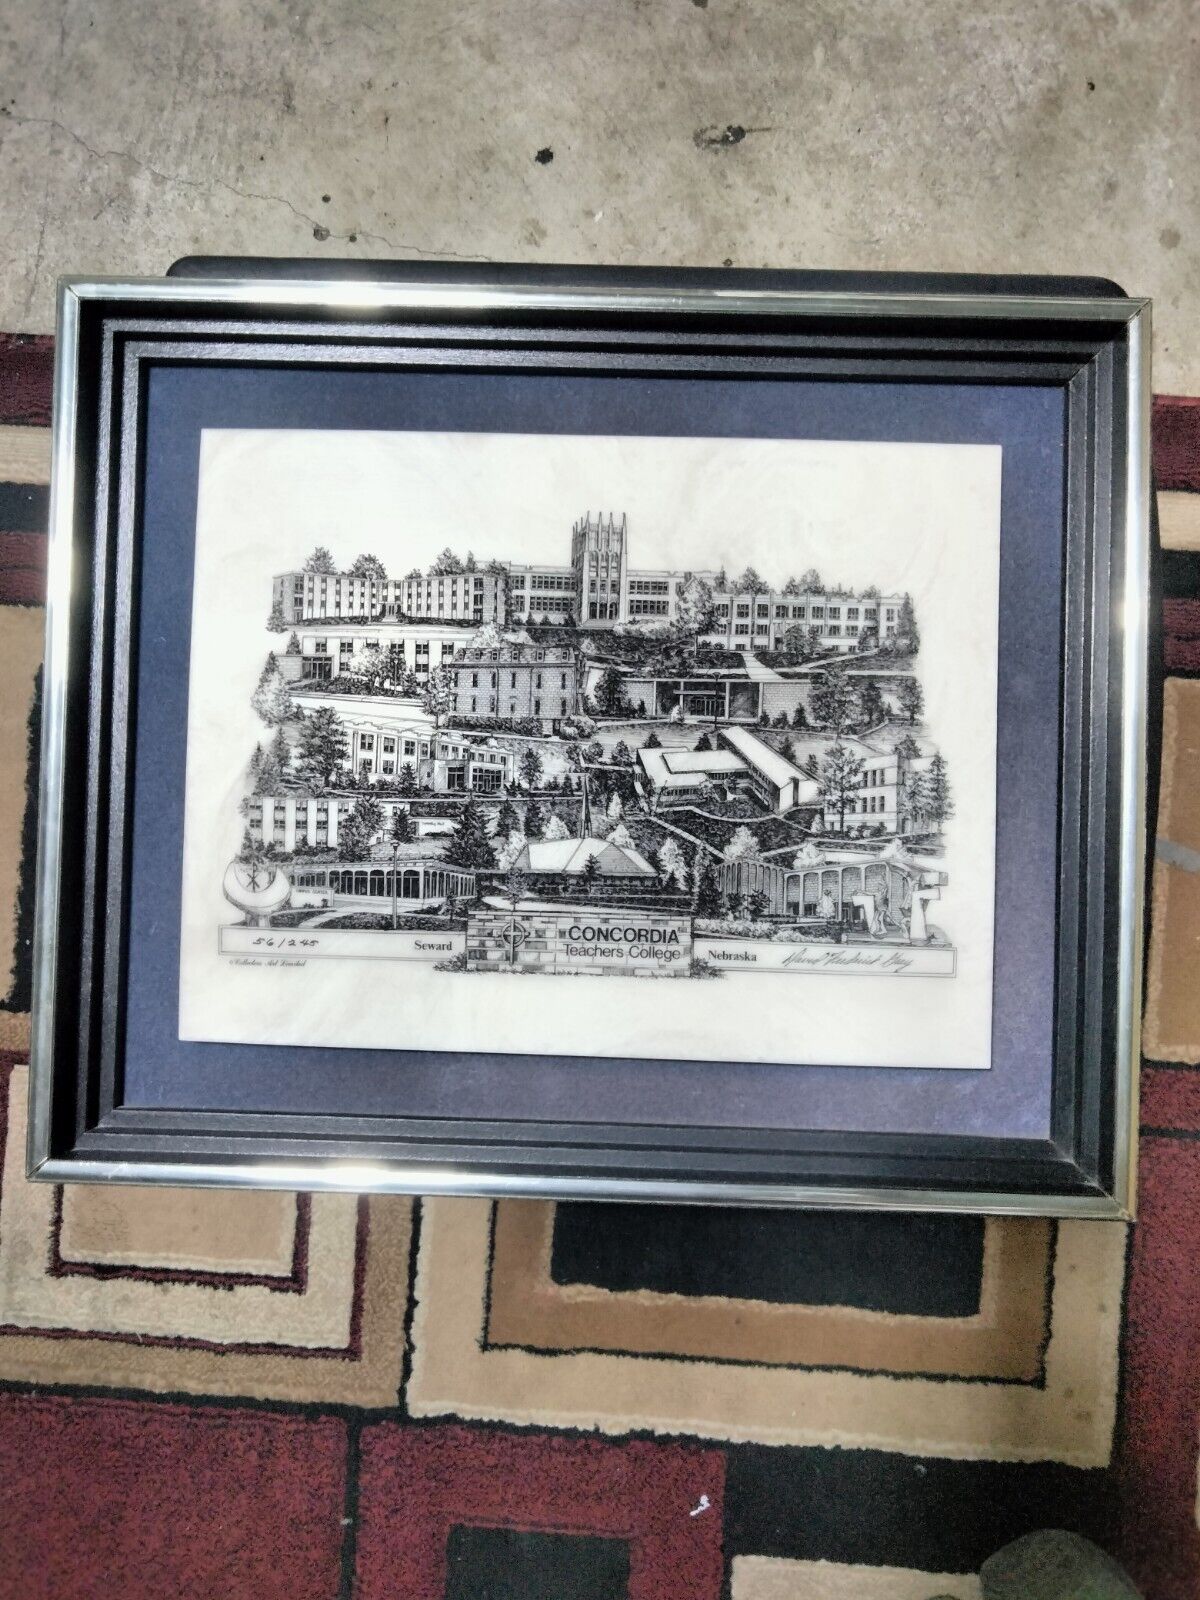 Signed Etched Marble Picture Of Concordia Teachers College In Seward Nebraska